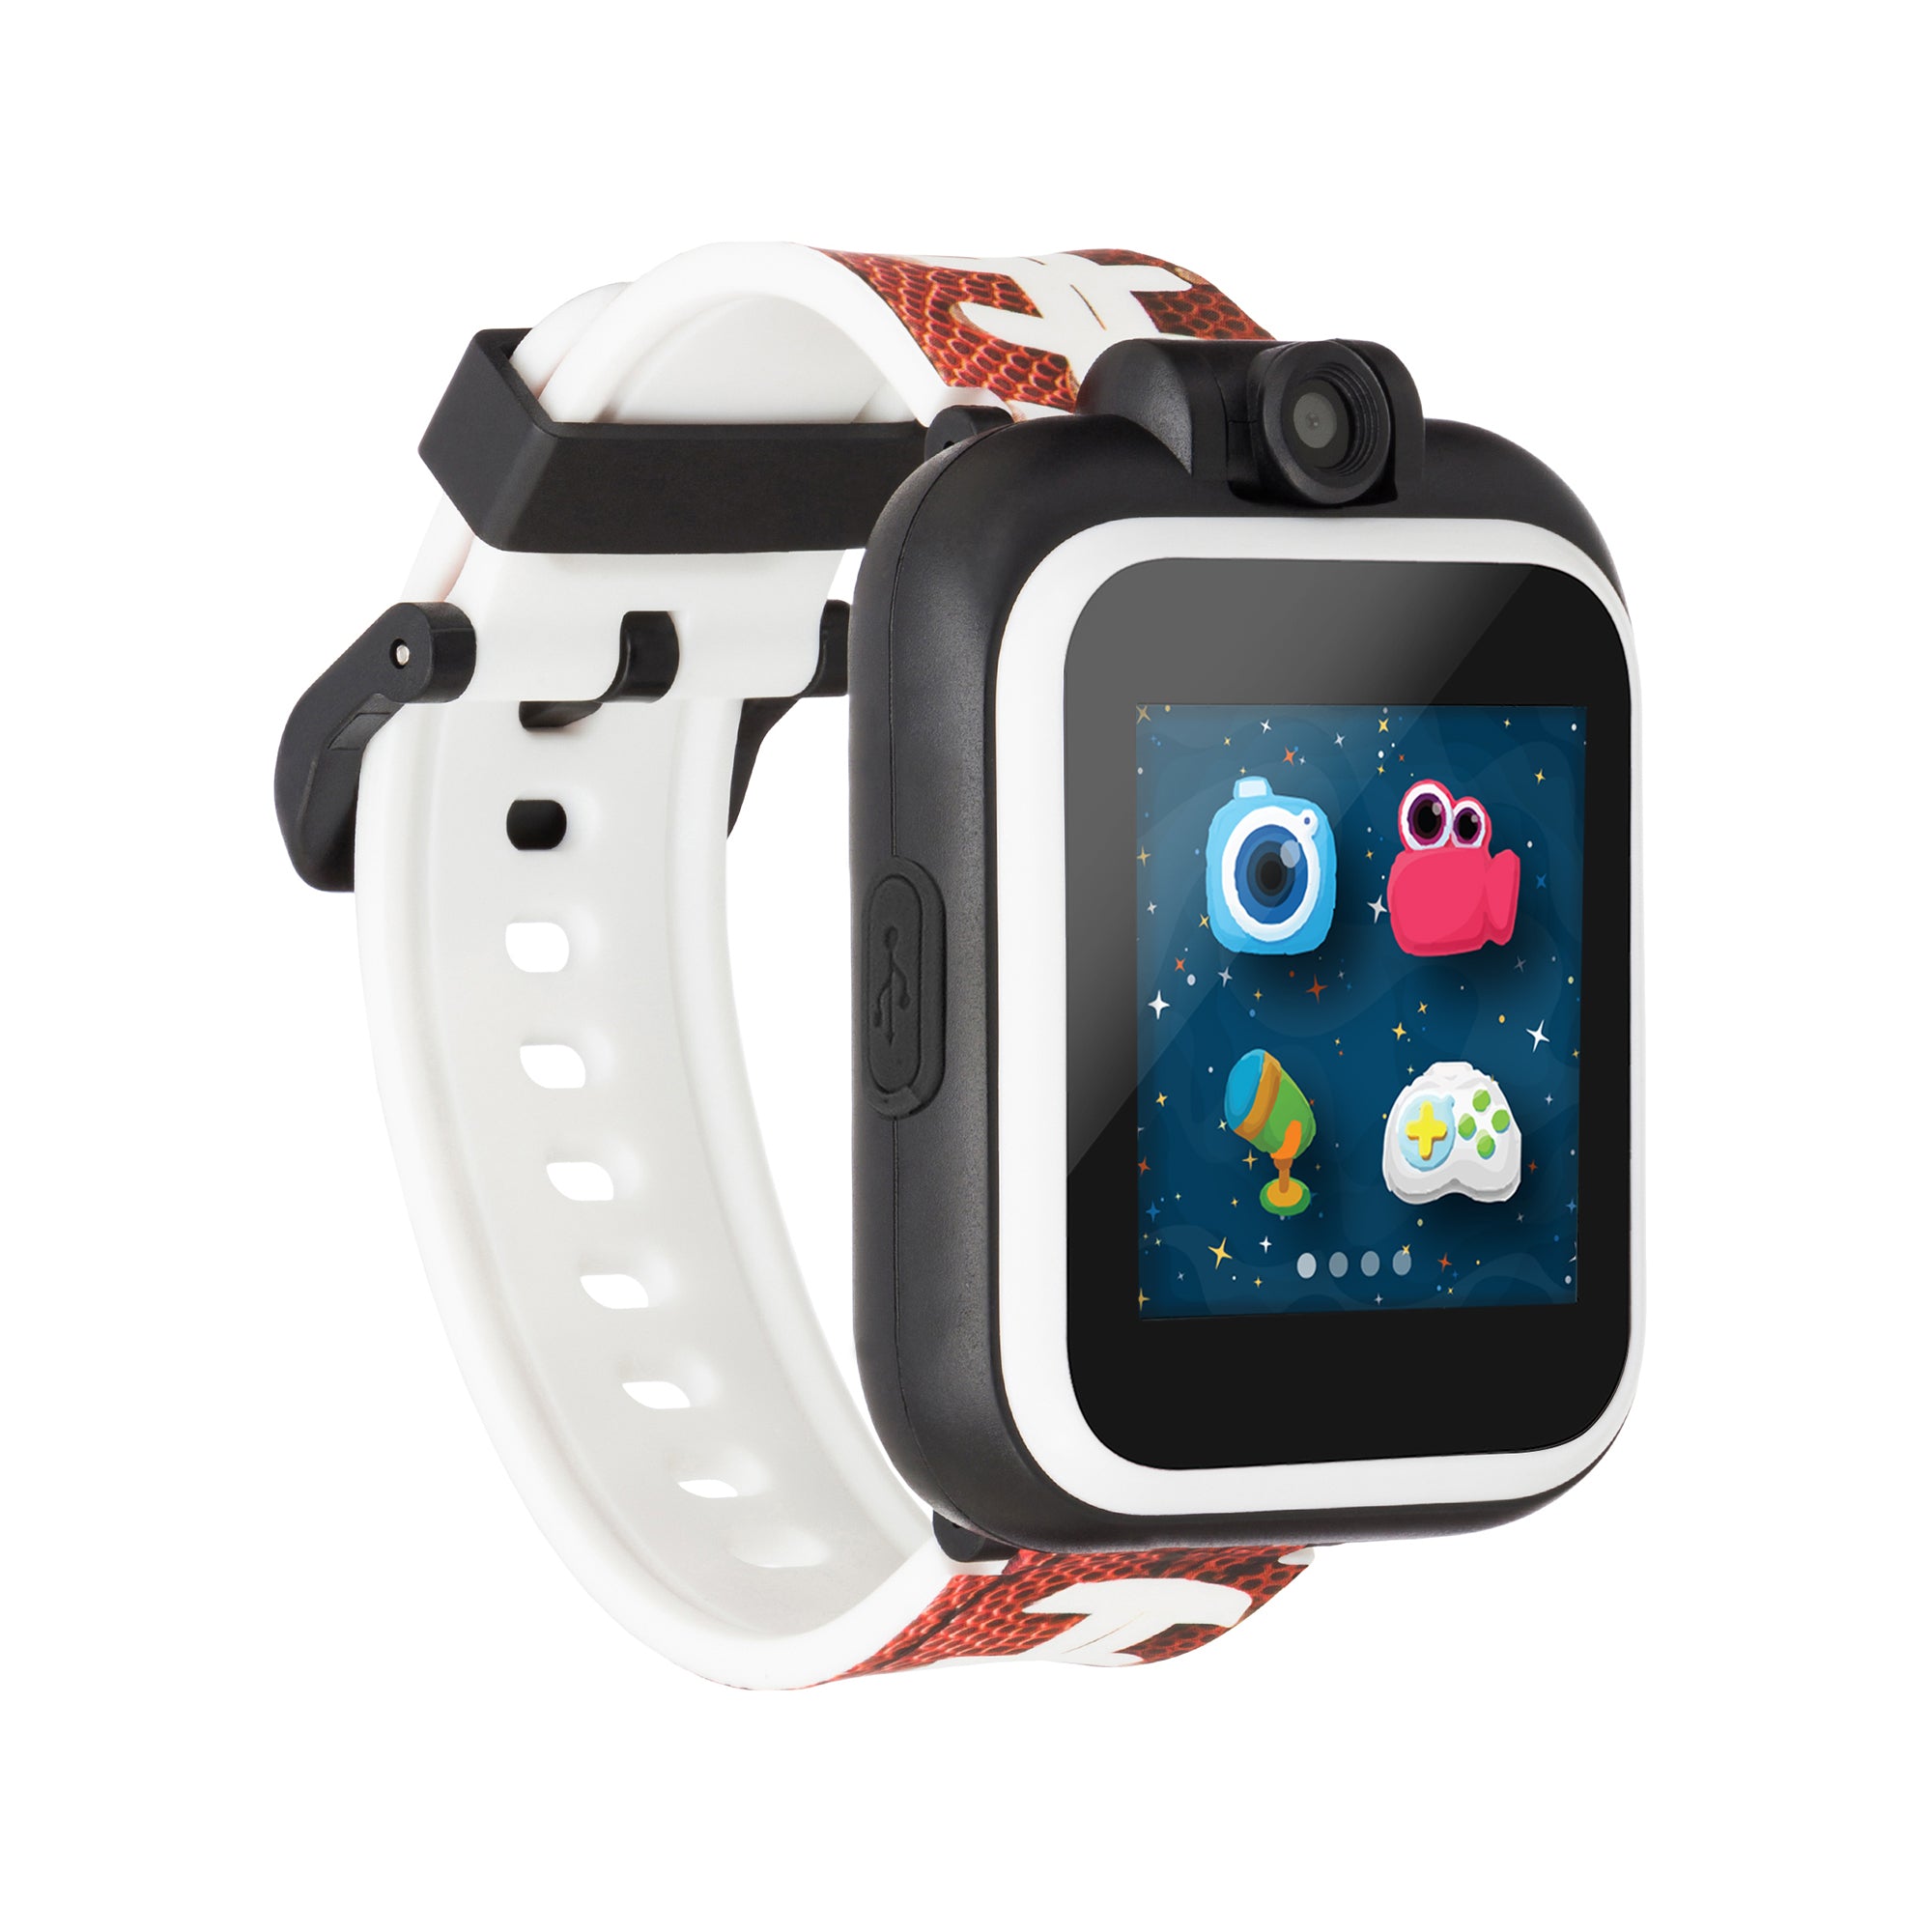 PlayZoom Smartwatch for Kids: Football Print affordable smart watch